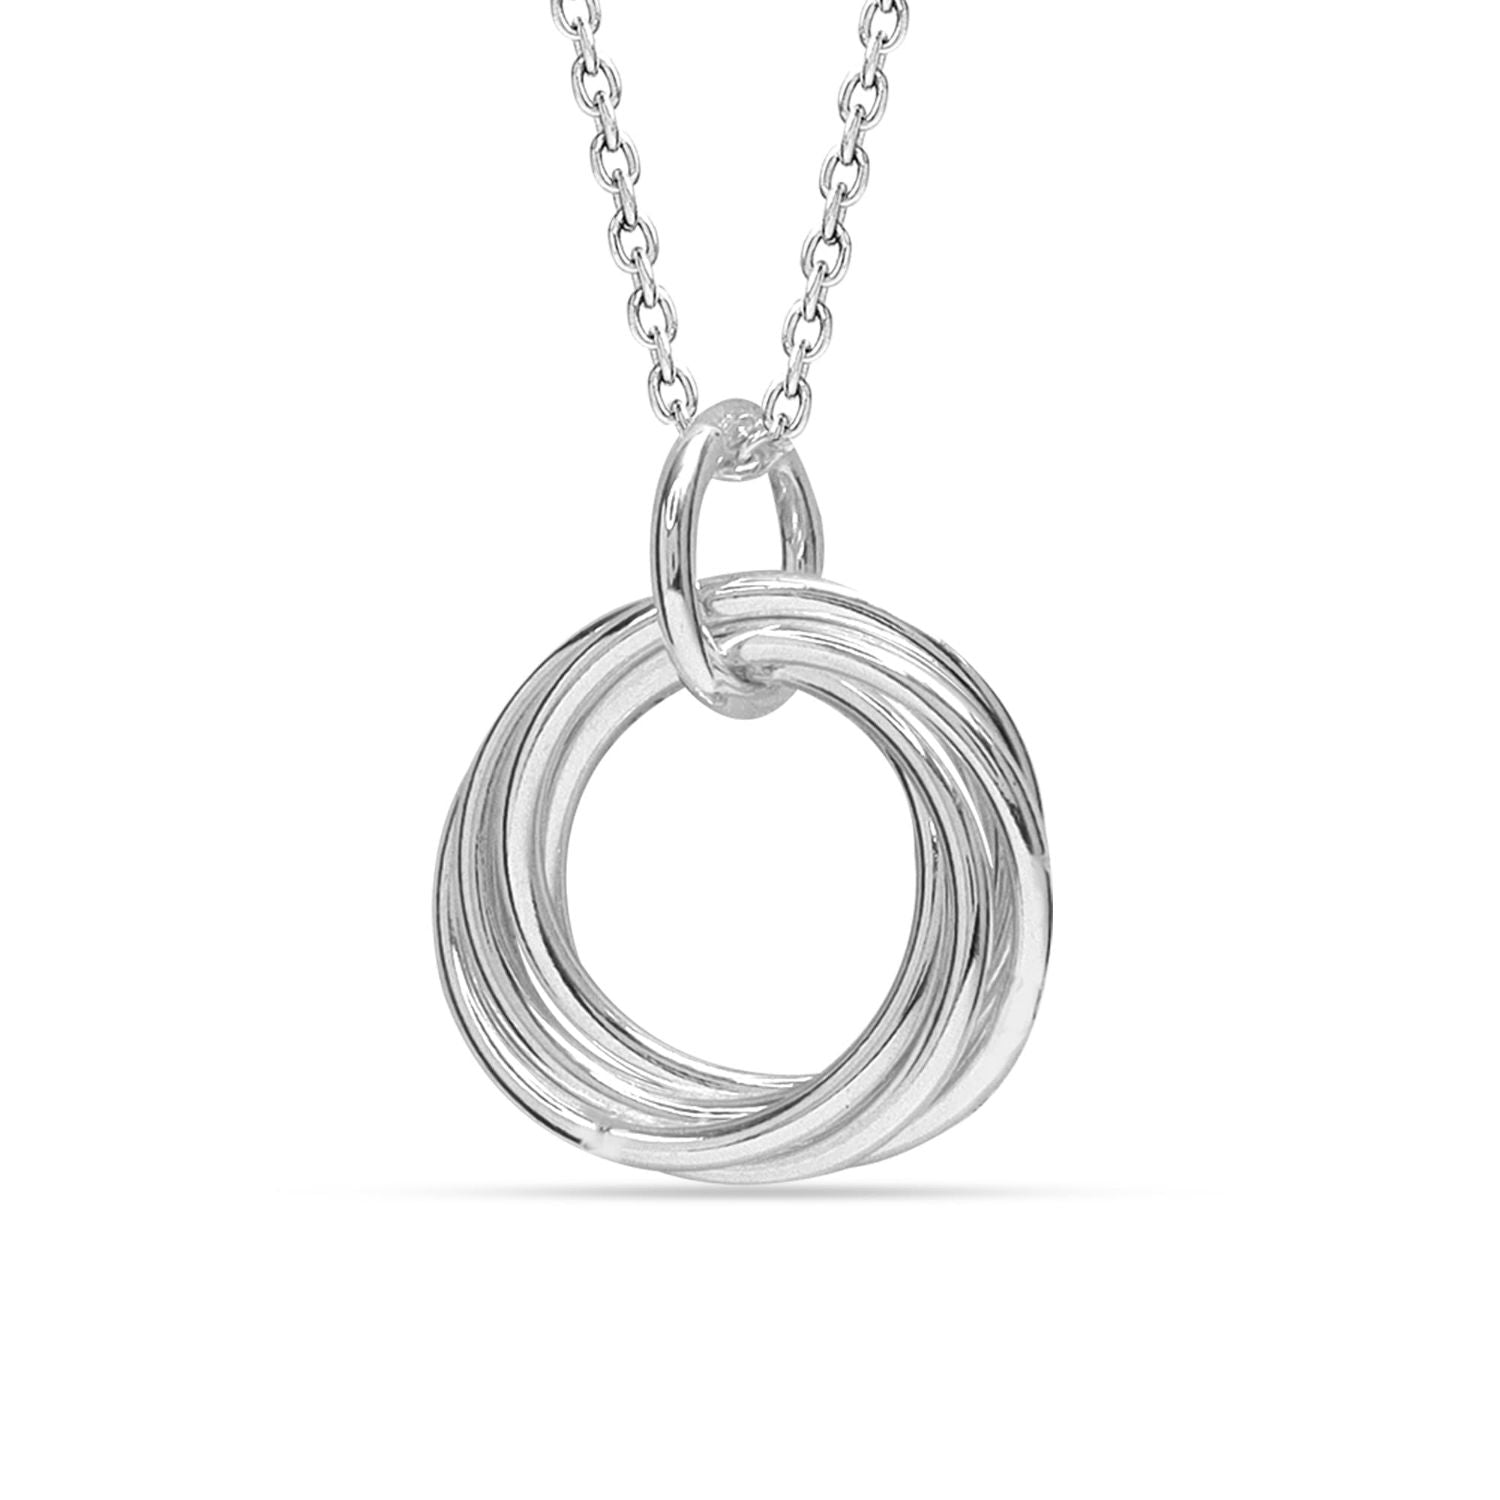 925 Sterling Silver Adjustable Knot Twisted Circle Pendant Necklace for Women Teen